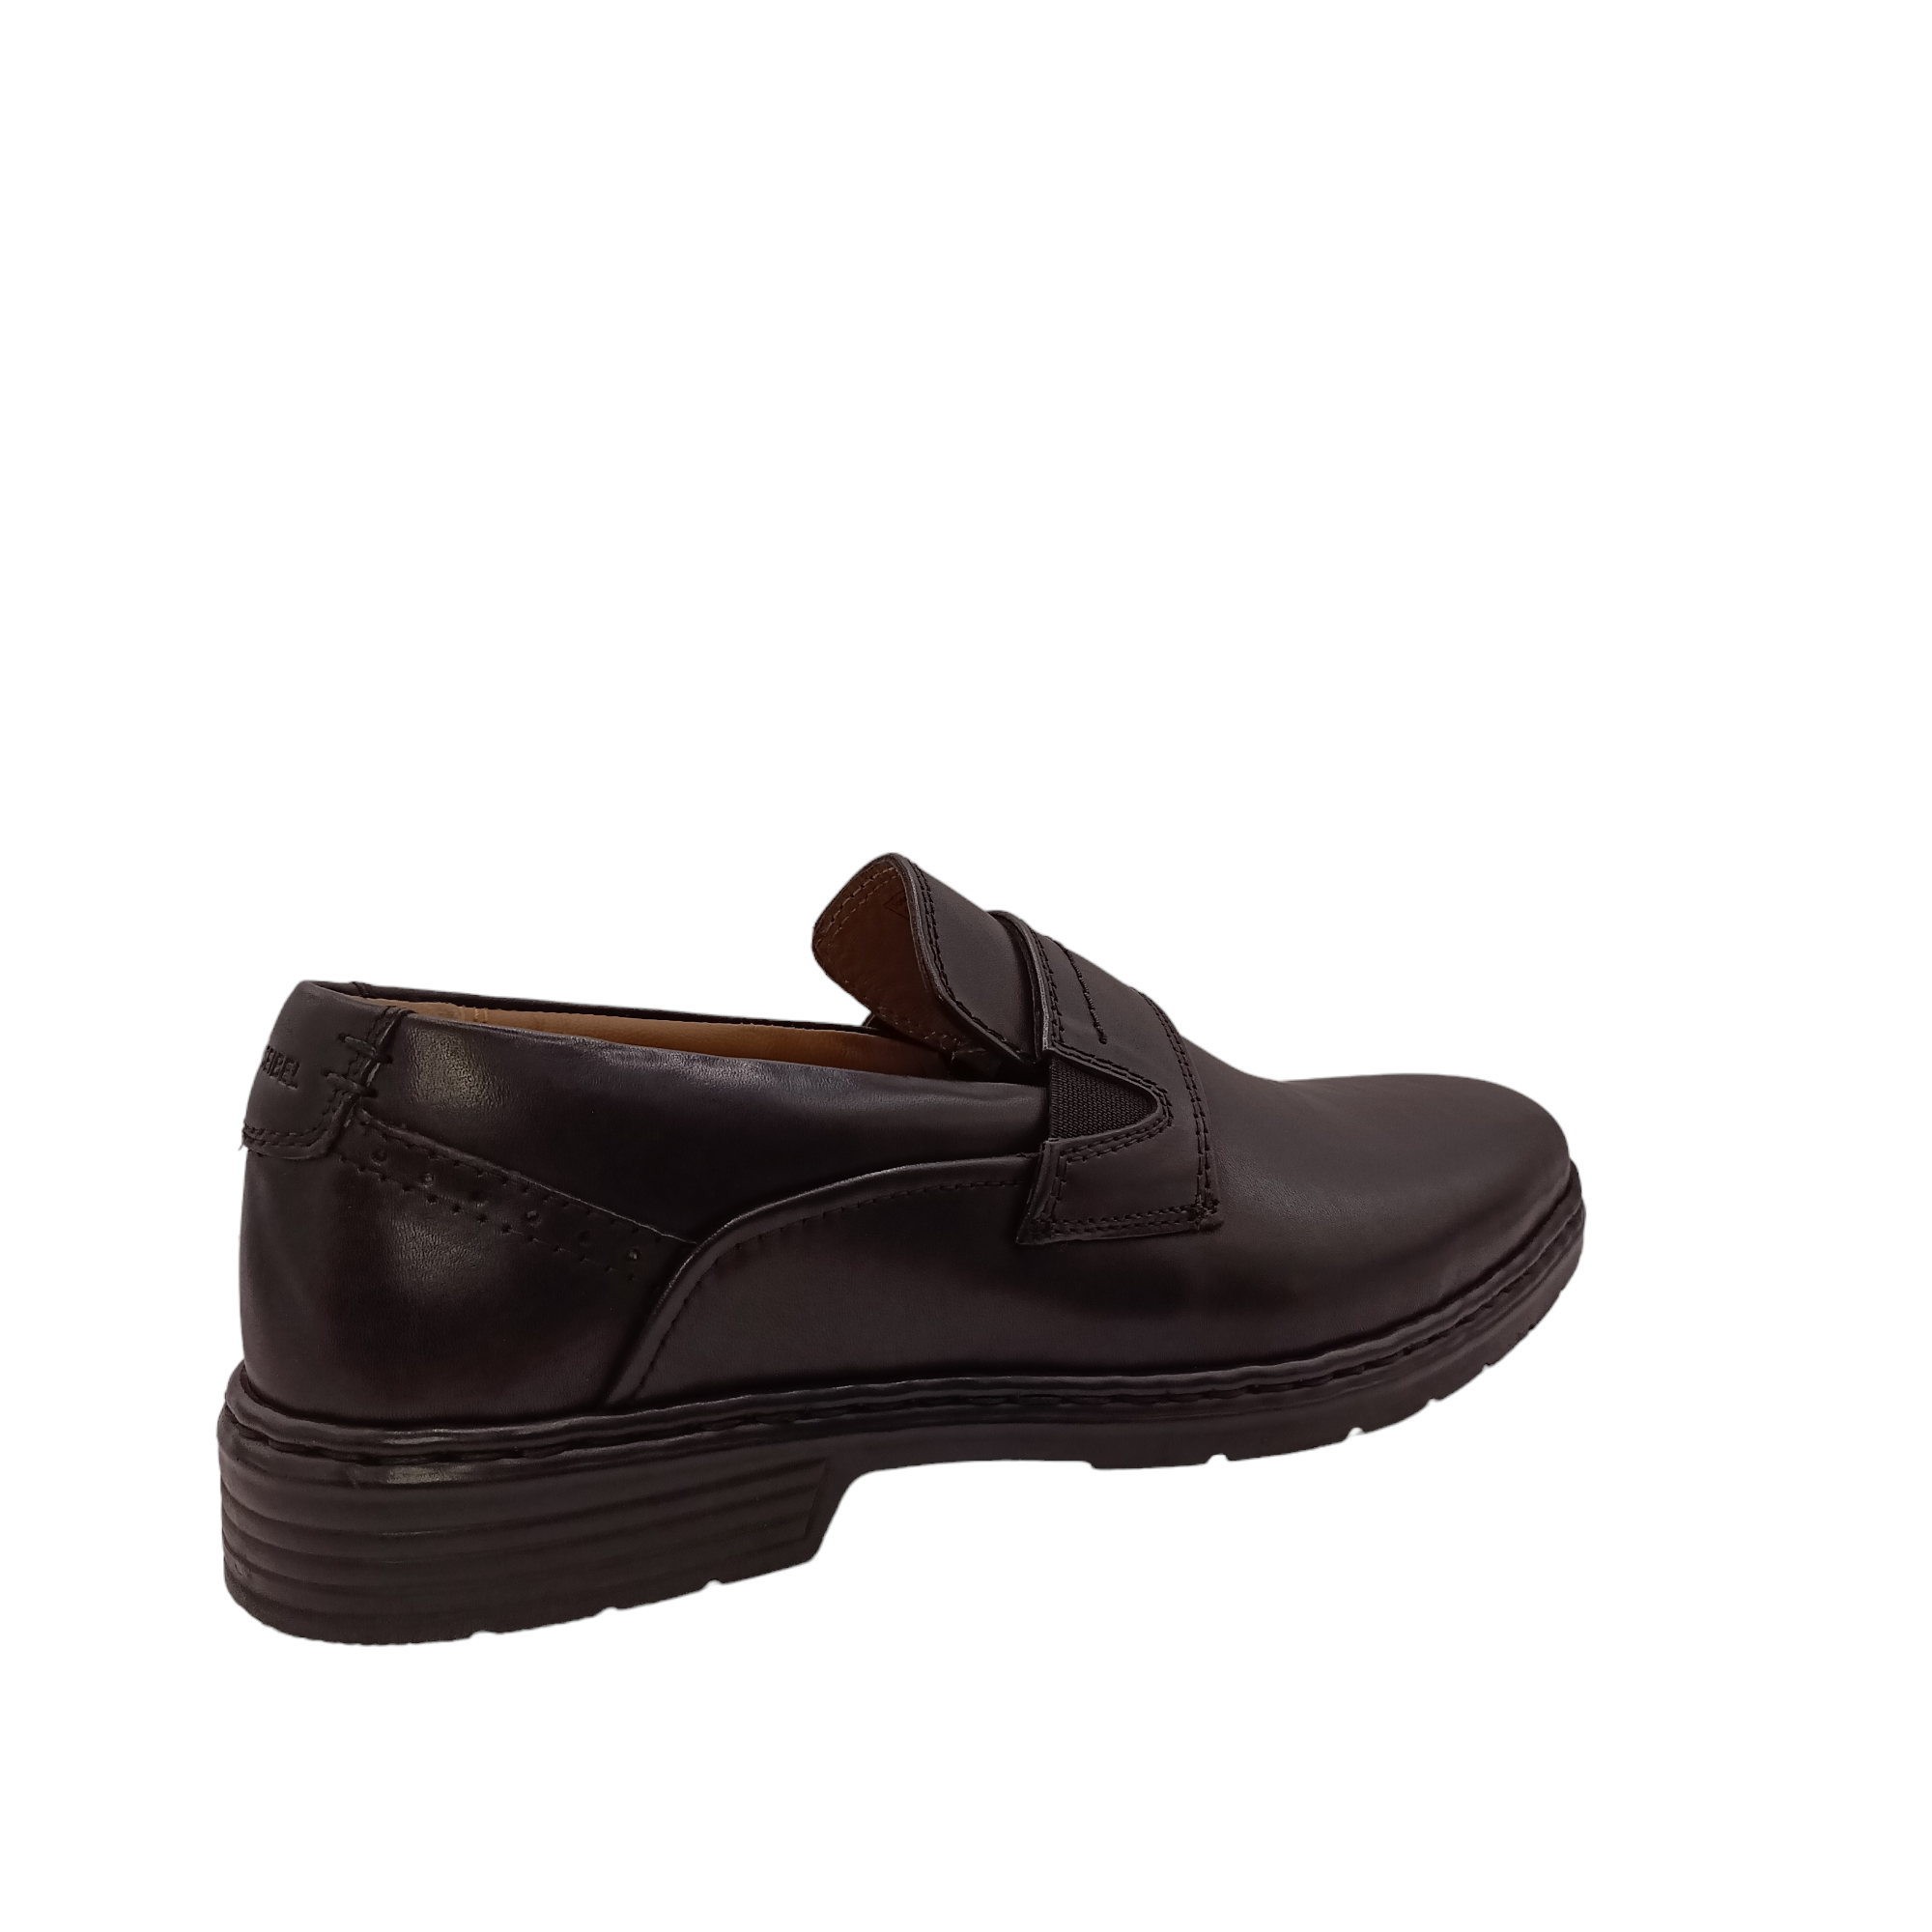 Shop Alastair 15 Josef Seibel - with shoe&amp;me - from Josef Seibel - Shoes - Mens, Shoe, Winter - [collection]